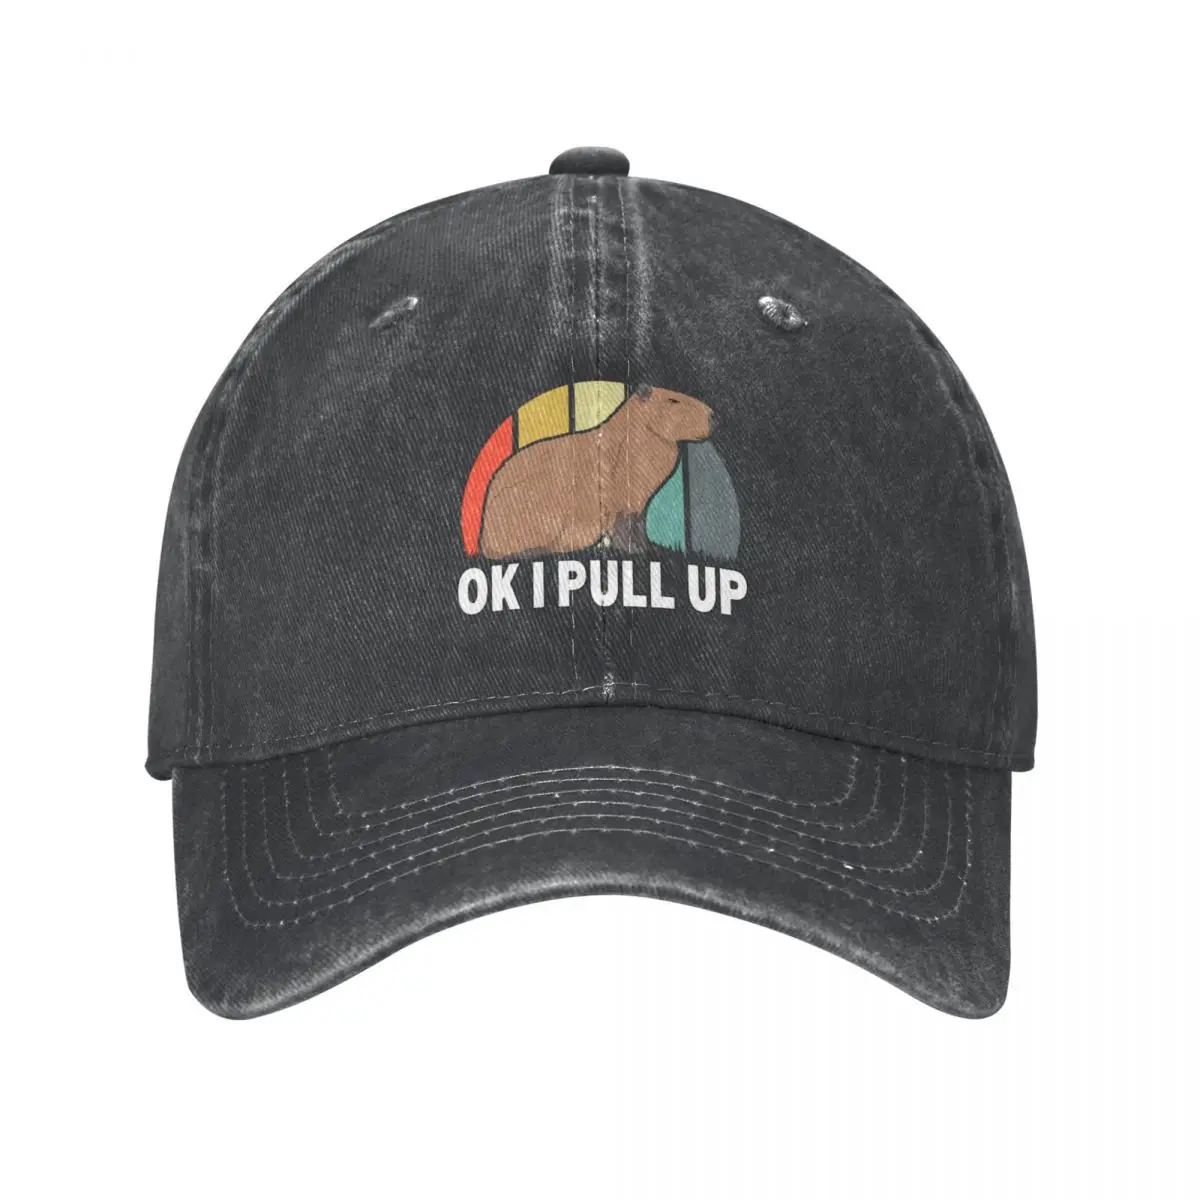 

Ok I Pull Up Capybara Retro Vintage Funny Rodent Animal Cap Cowboy Hat Fishing caps Mountaineering Hat for girls Men's